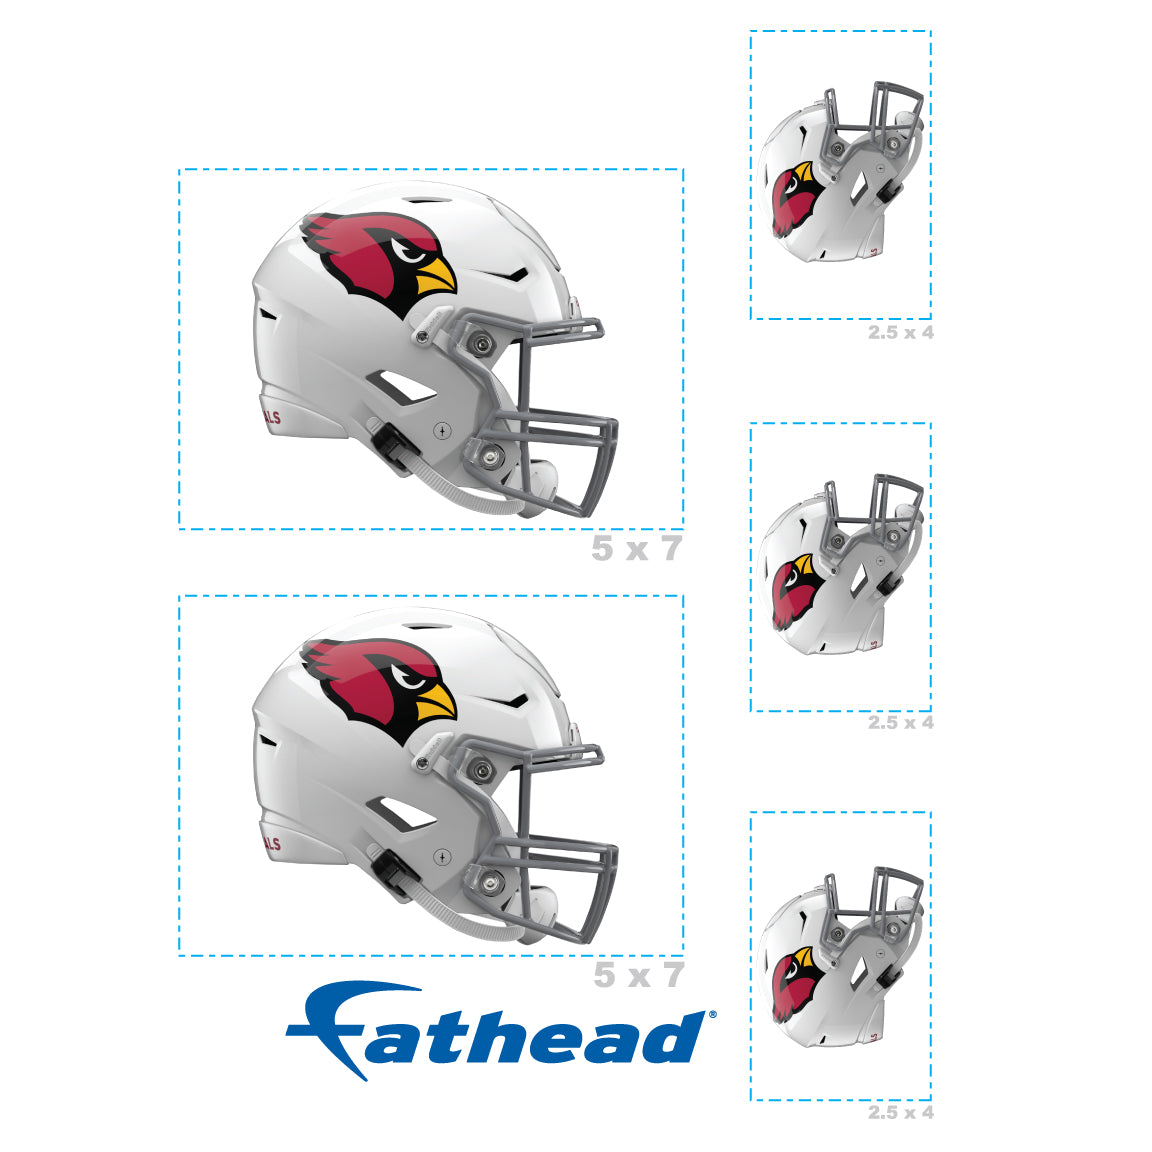 Arizona Cardinals: Helmet Minis - Officially Licensed NFL Removable Adhesive Decal